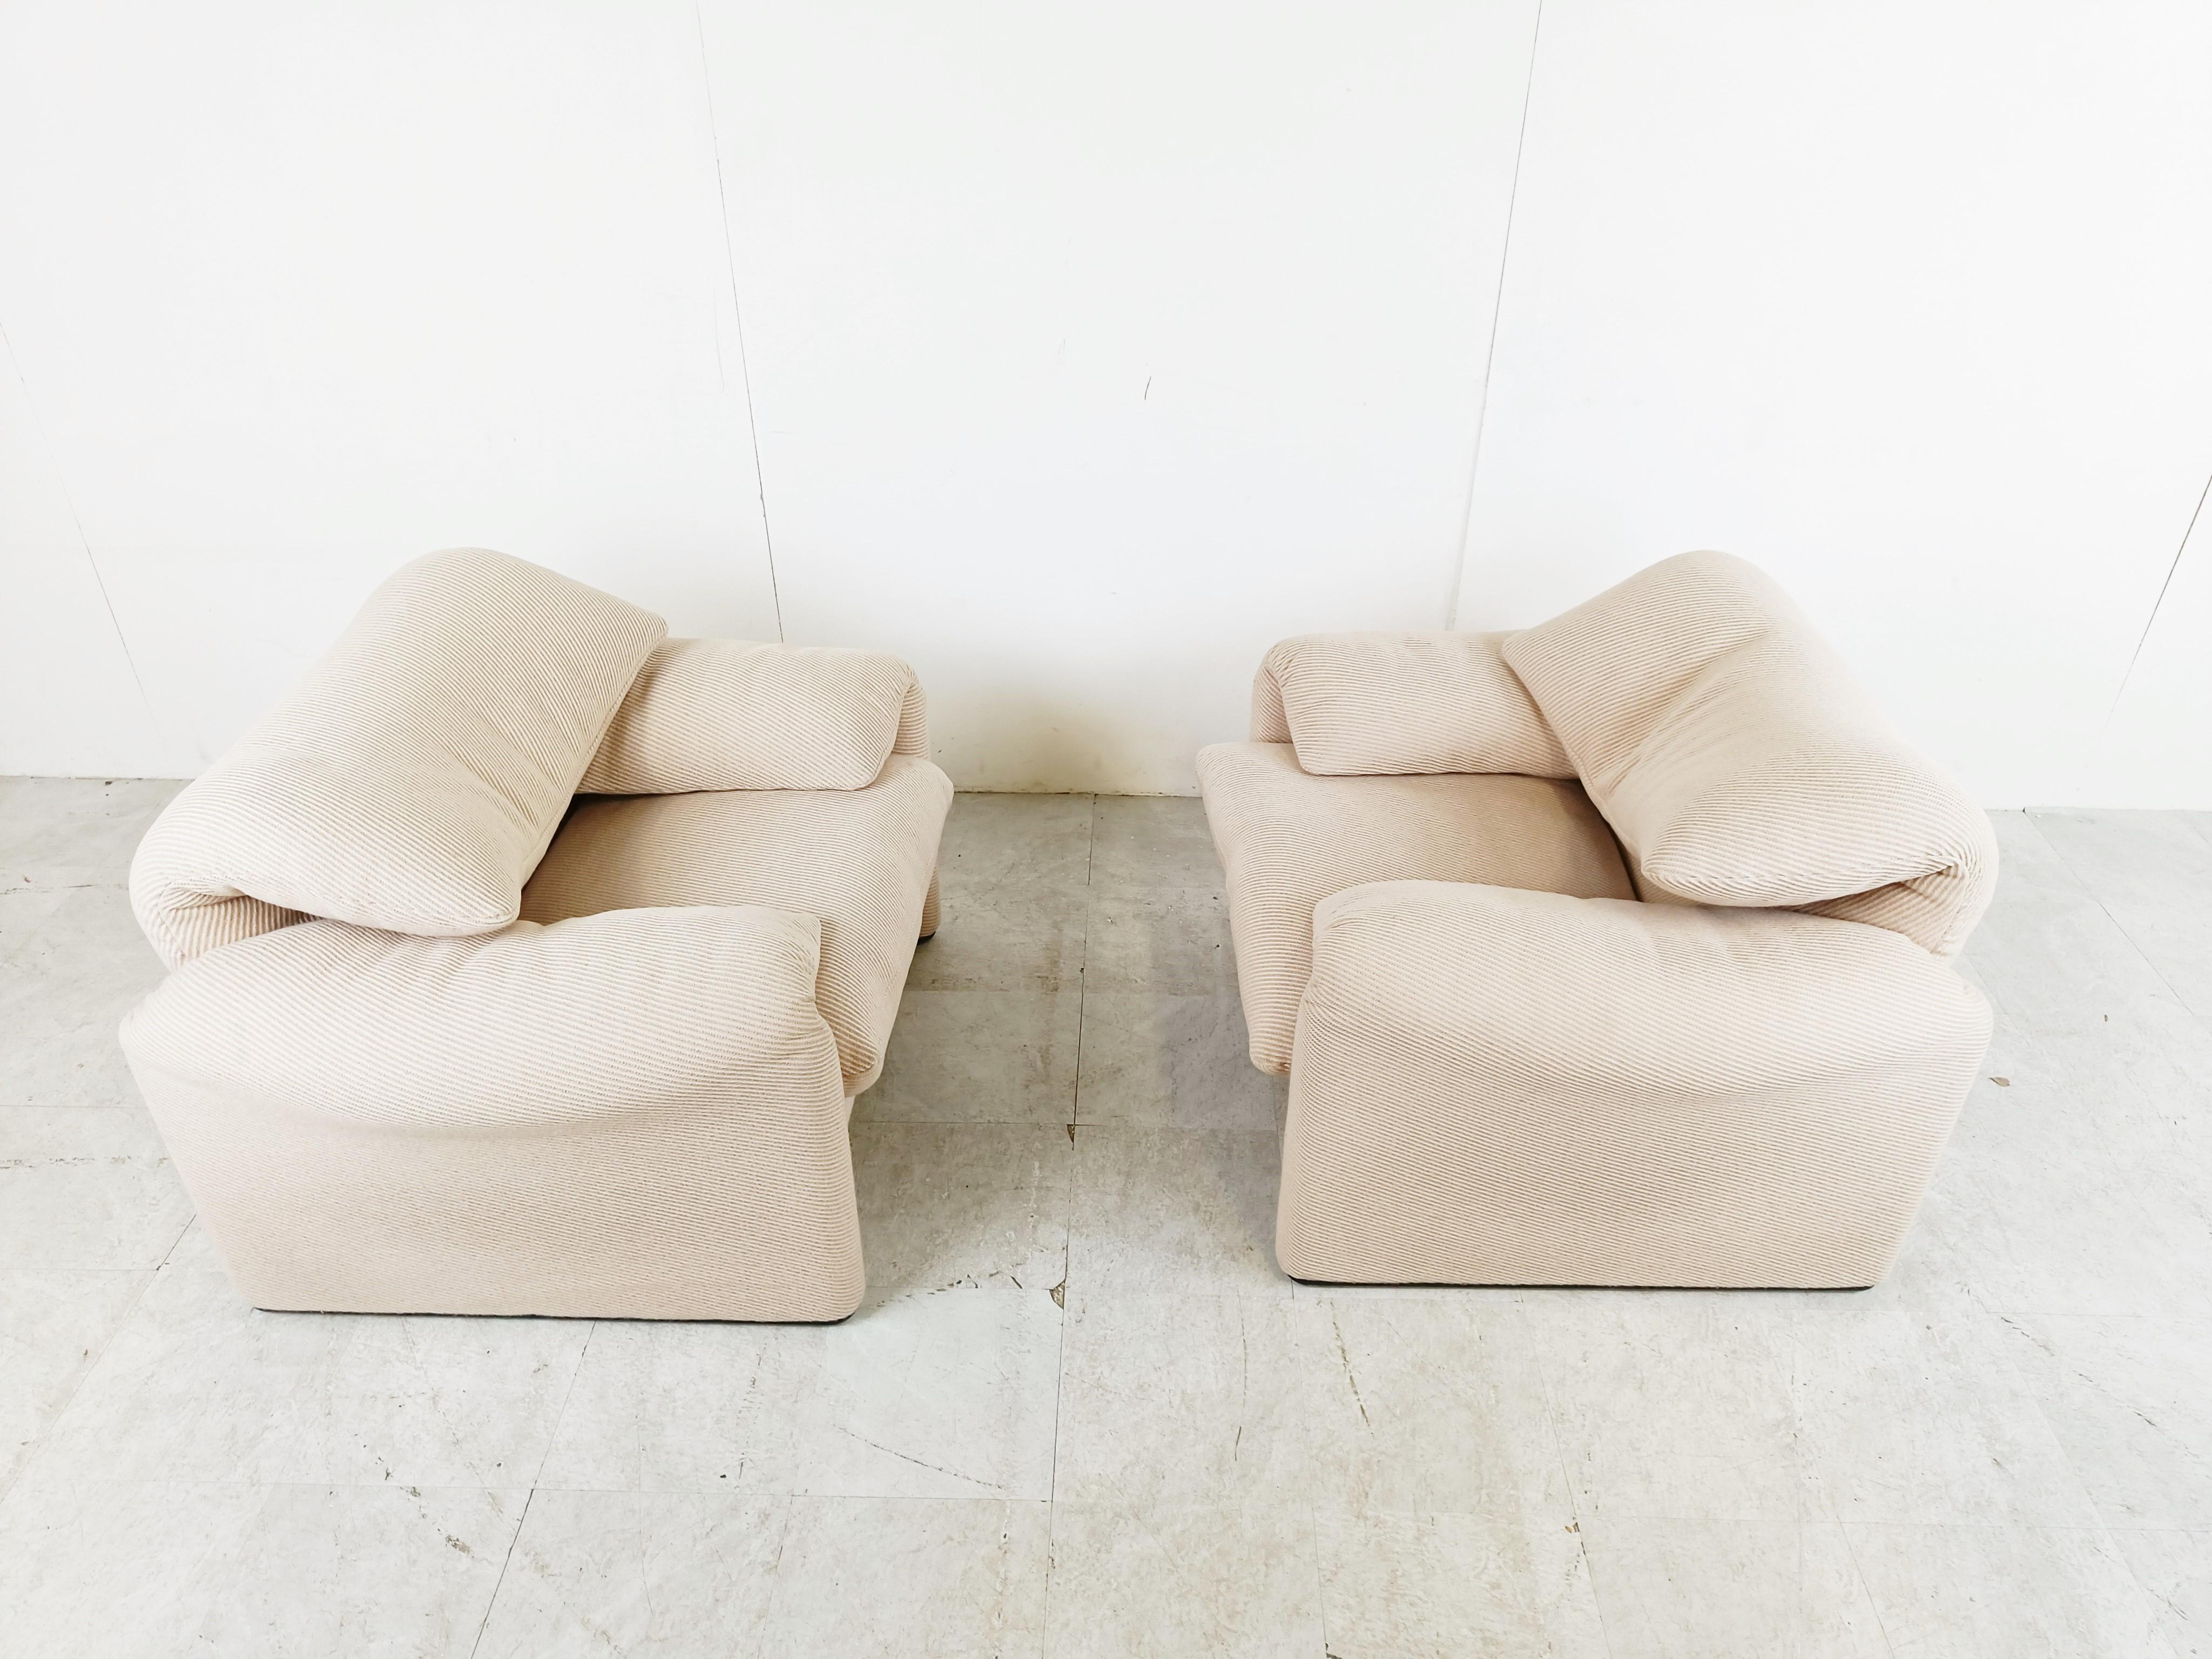 Pair of Maralunga armchair by Vico Magistretti for Cassina, 1973  2